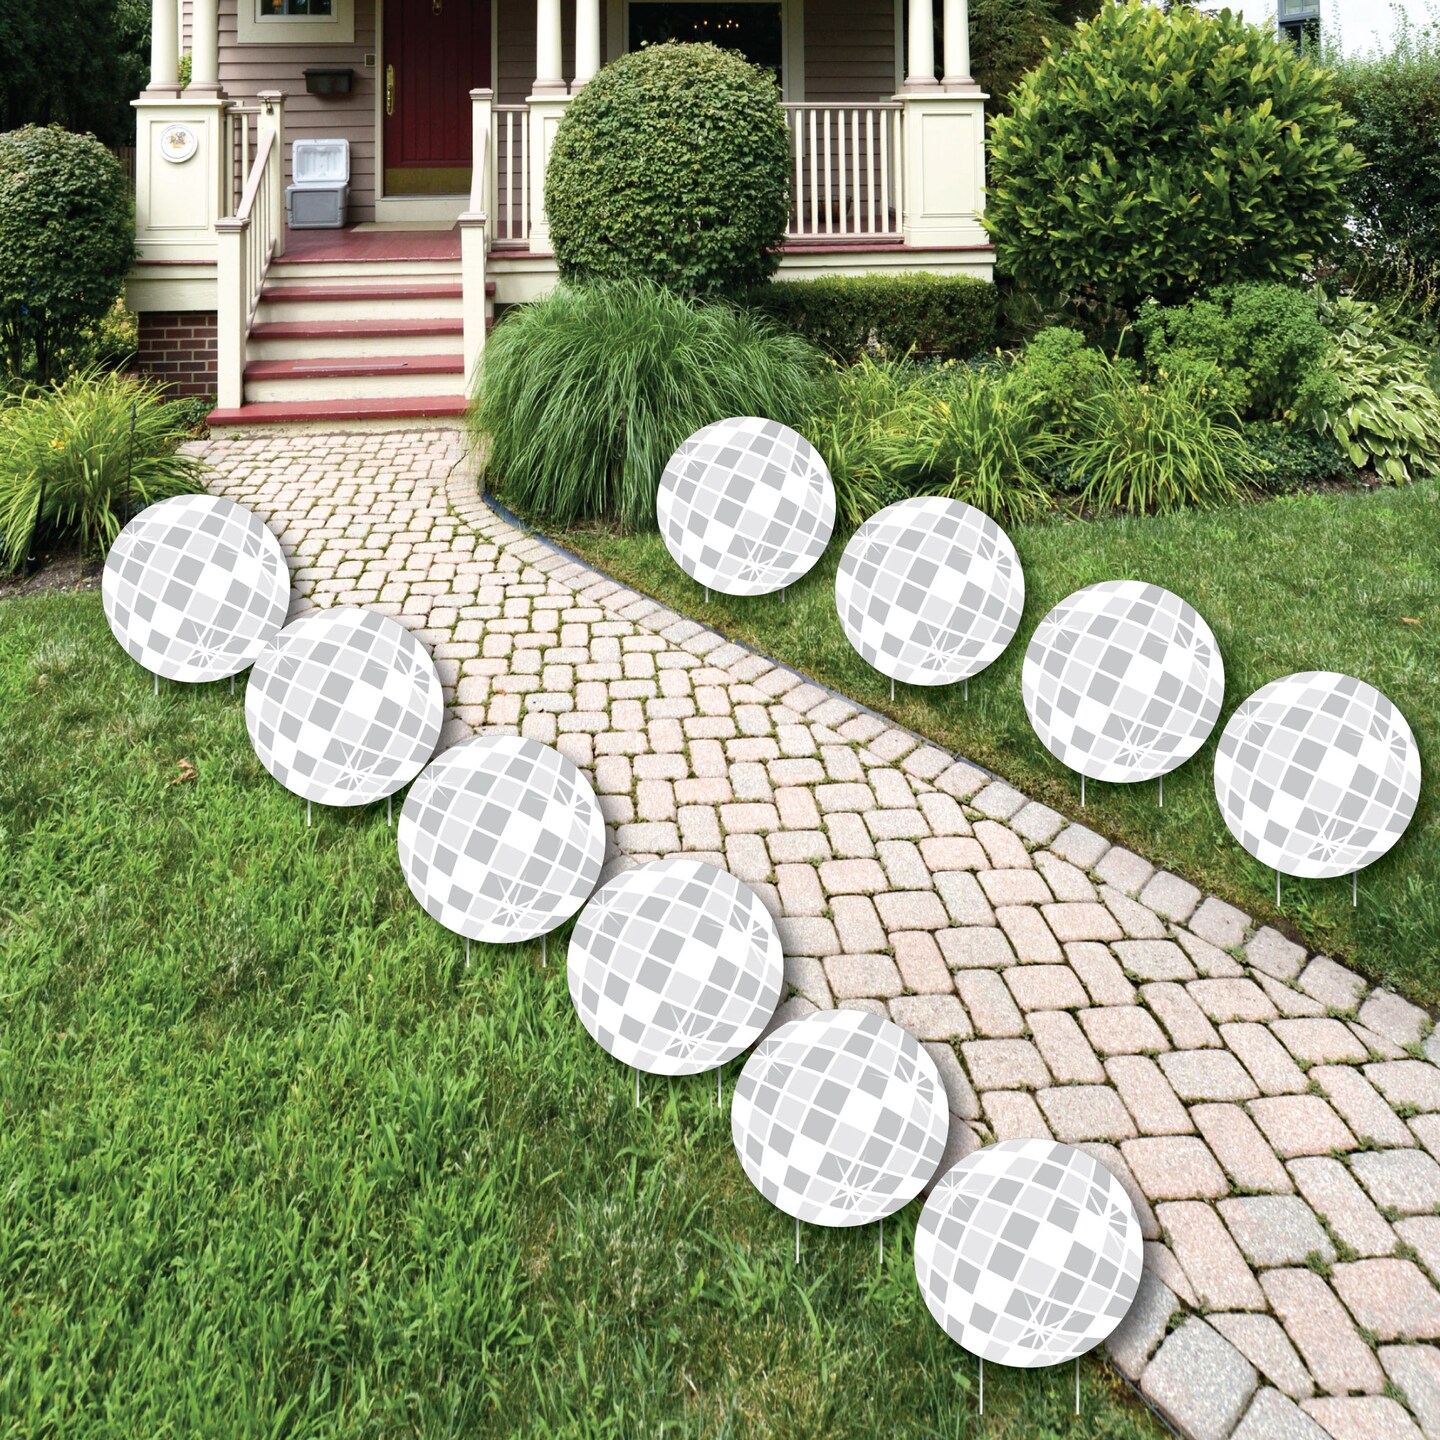 Big Dot of Happiness Disco Ball - Lawn Decorations - Outdoor Groovy Hippie Party Yard Decorations - 10 Piece